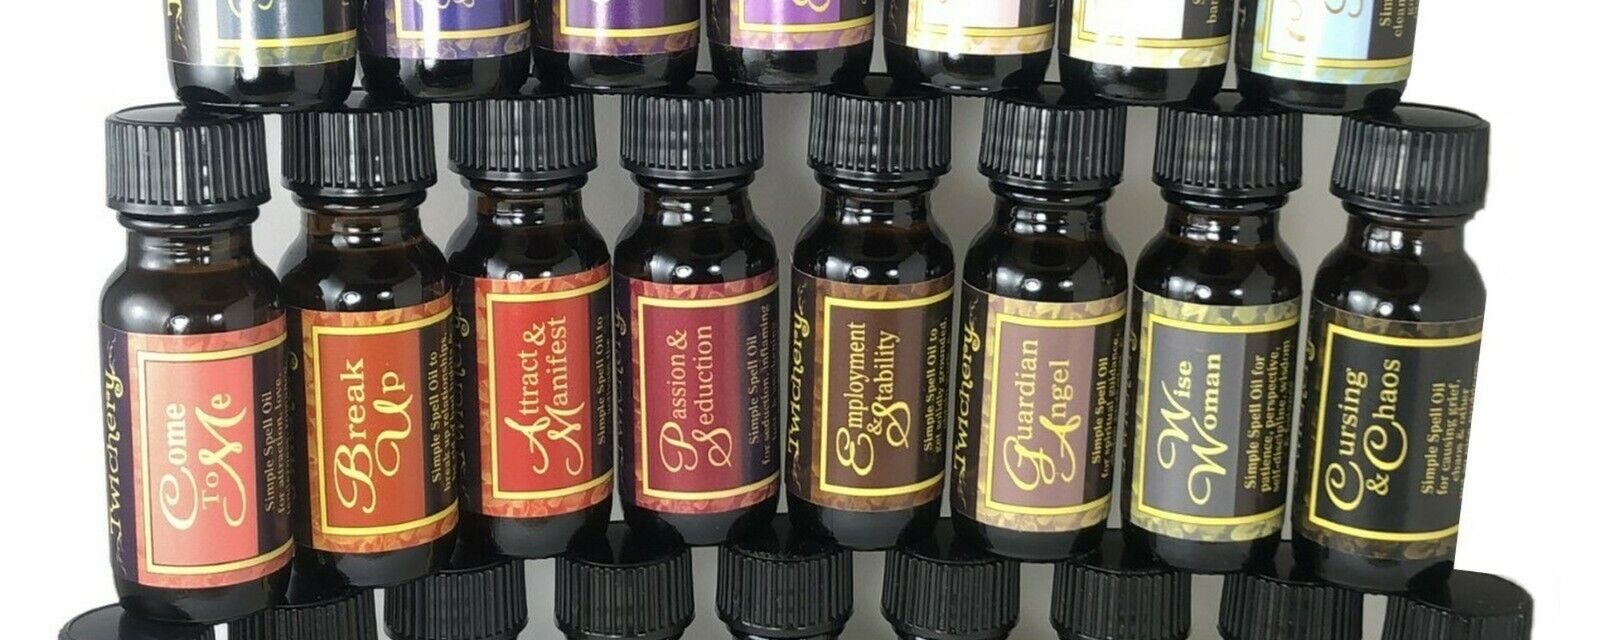 Aromatherapy Kits For Sale